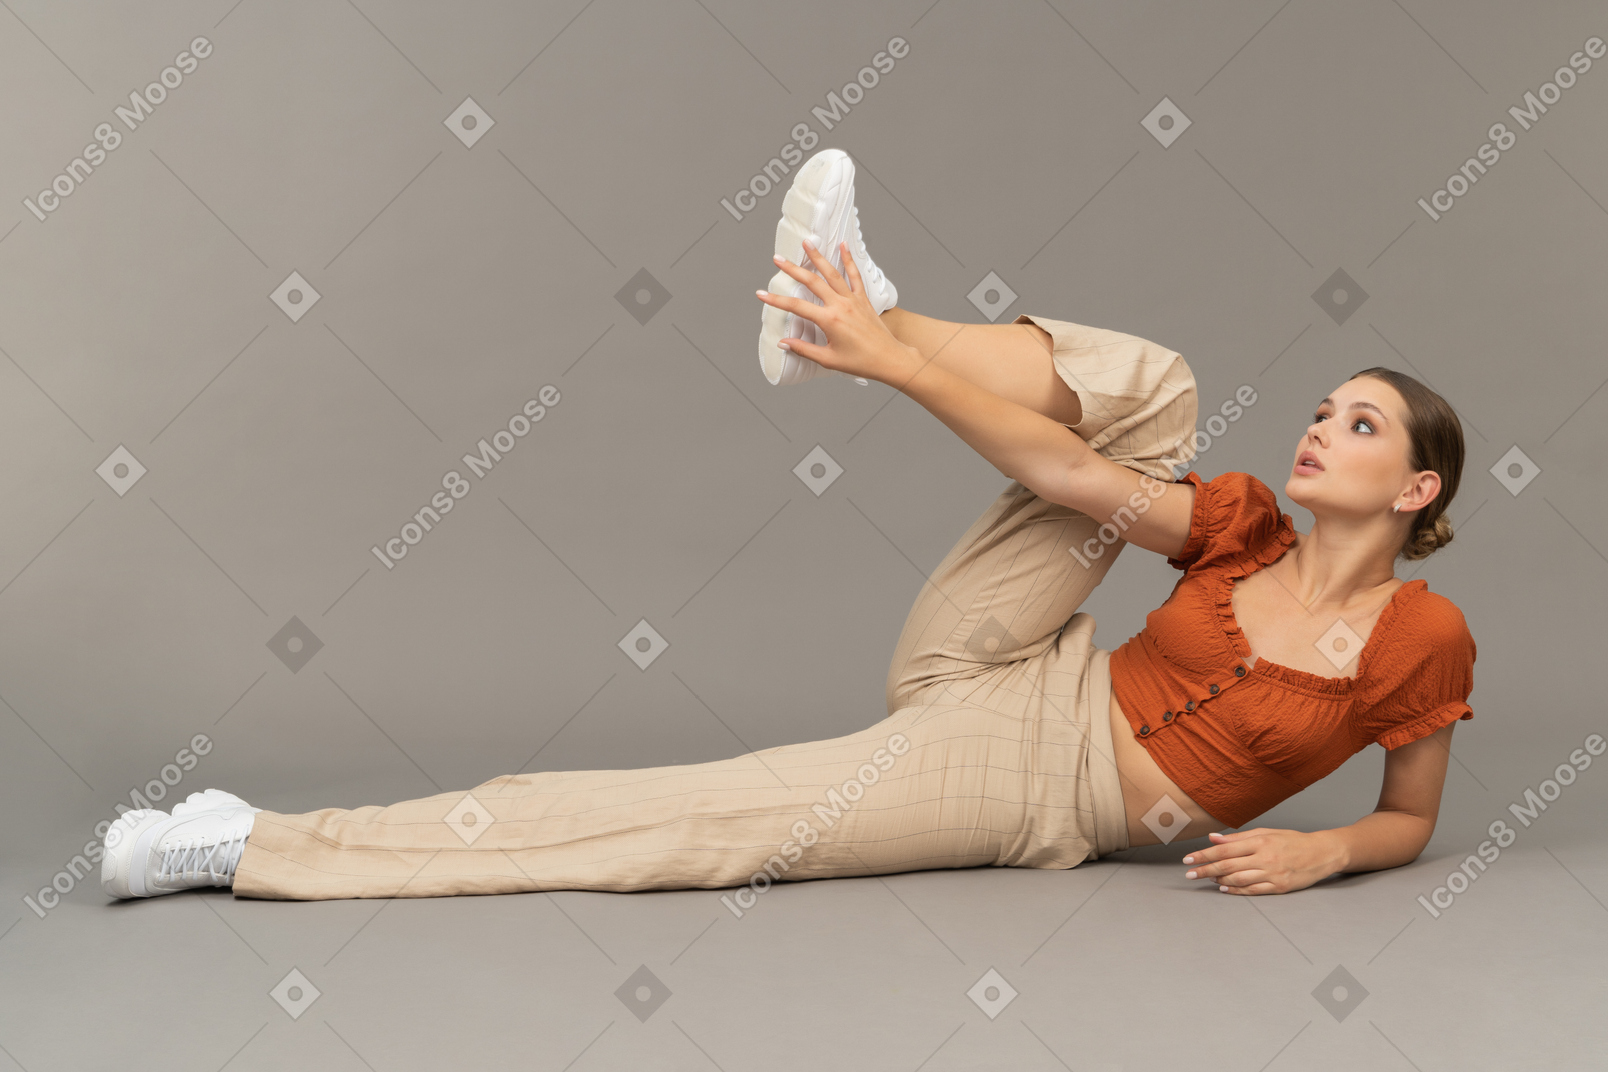 Young woman lies down and holds her leg